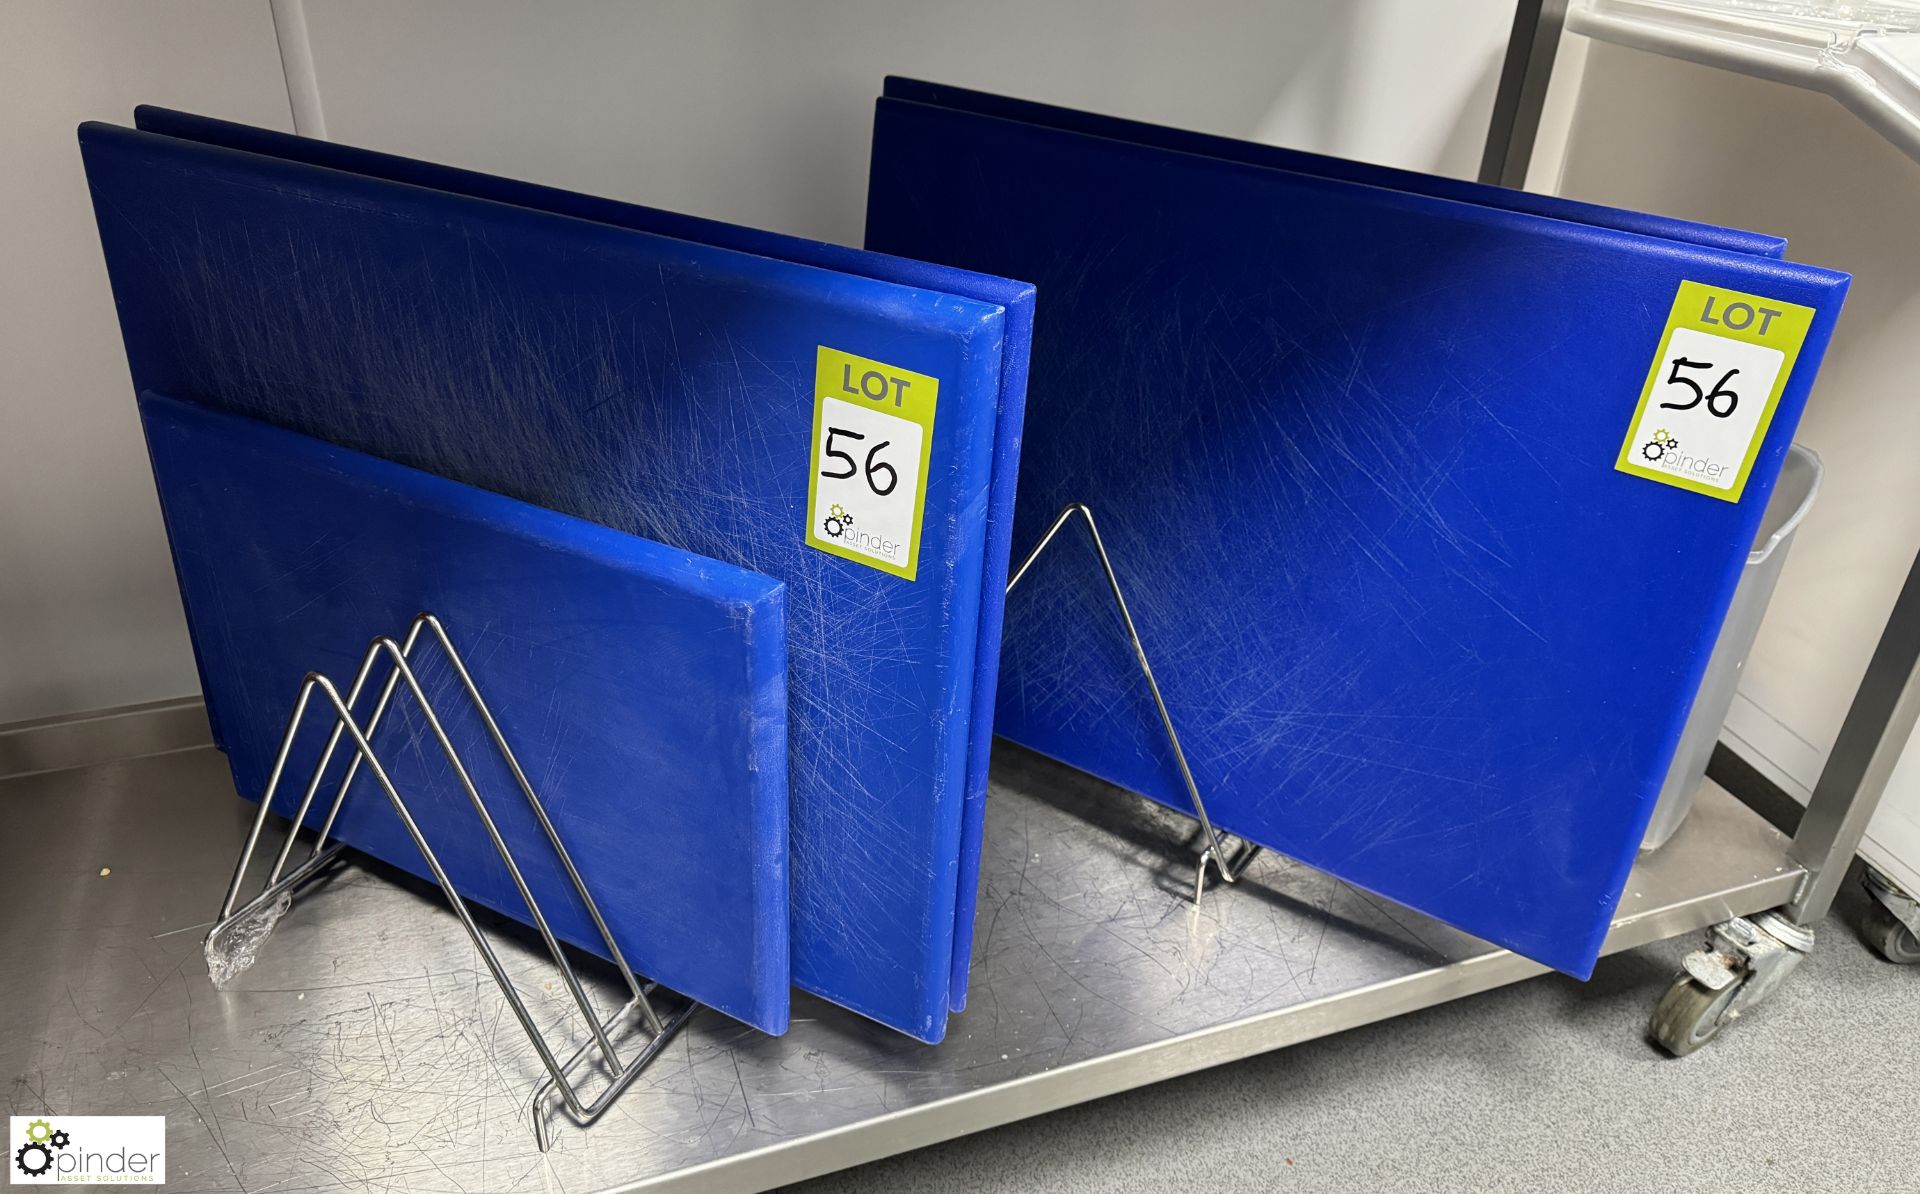 6 blue Nylon Chopping Boards and 2 Stands (location in building – basement kitchen 2)